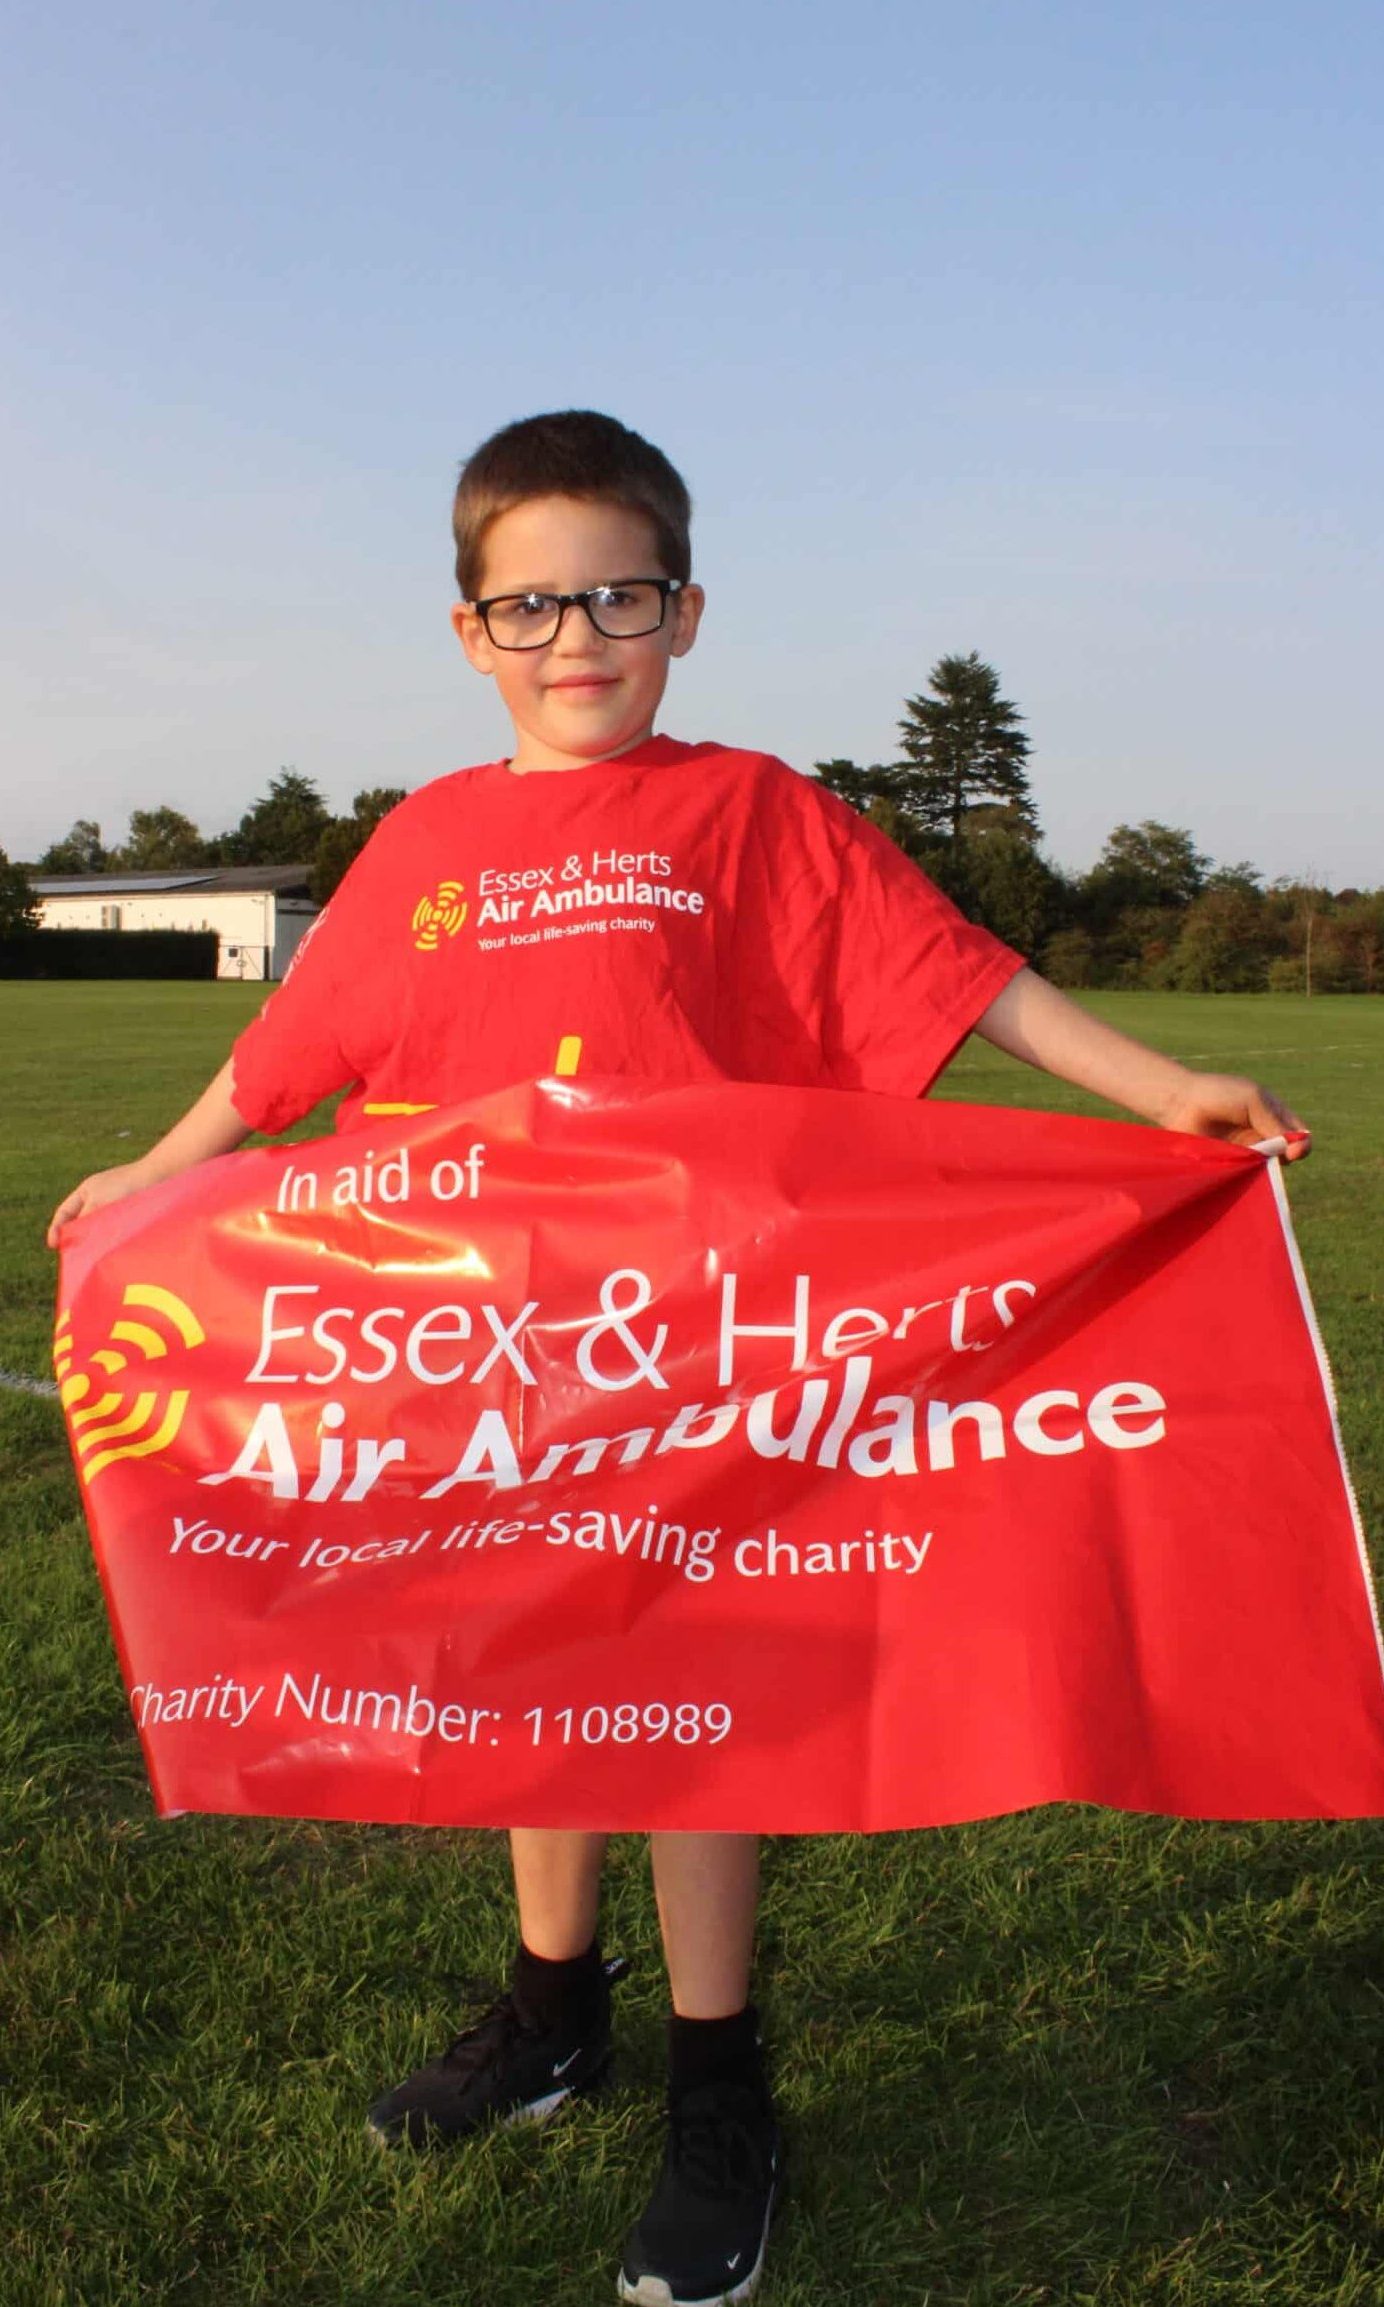 A young boy wearing glasses and a red EHAAT shirt holding up a red banner to fundraise for the charity.